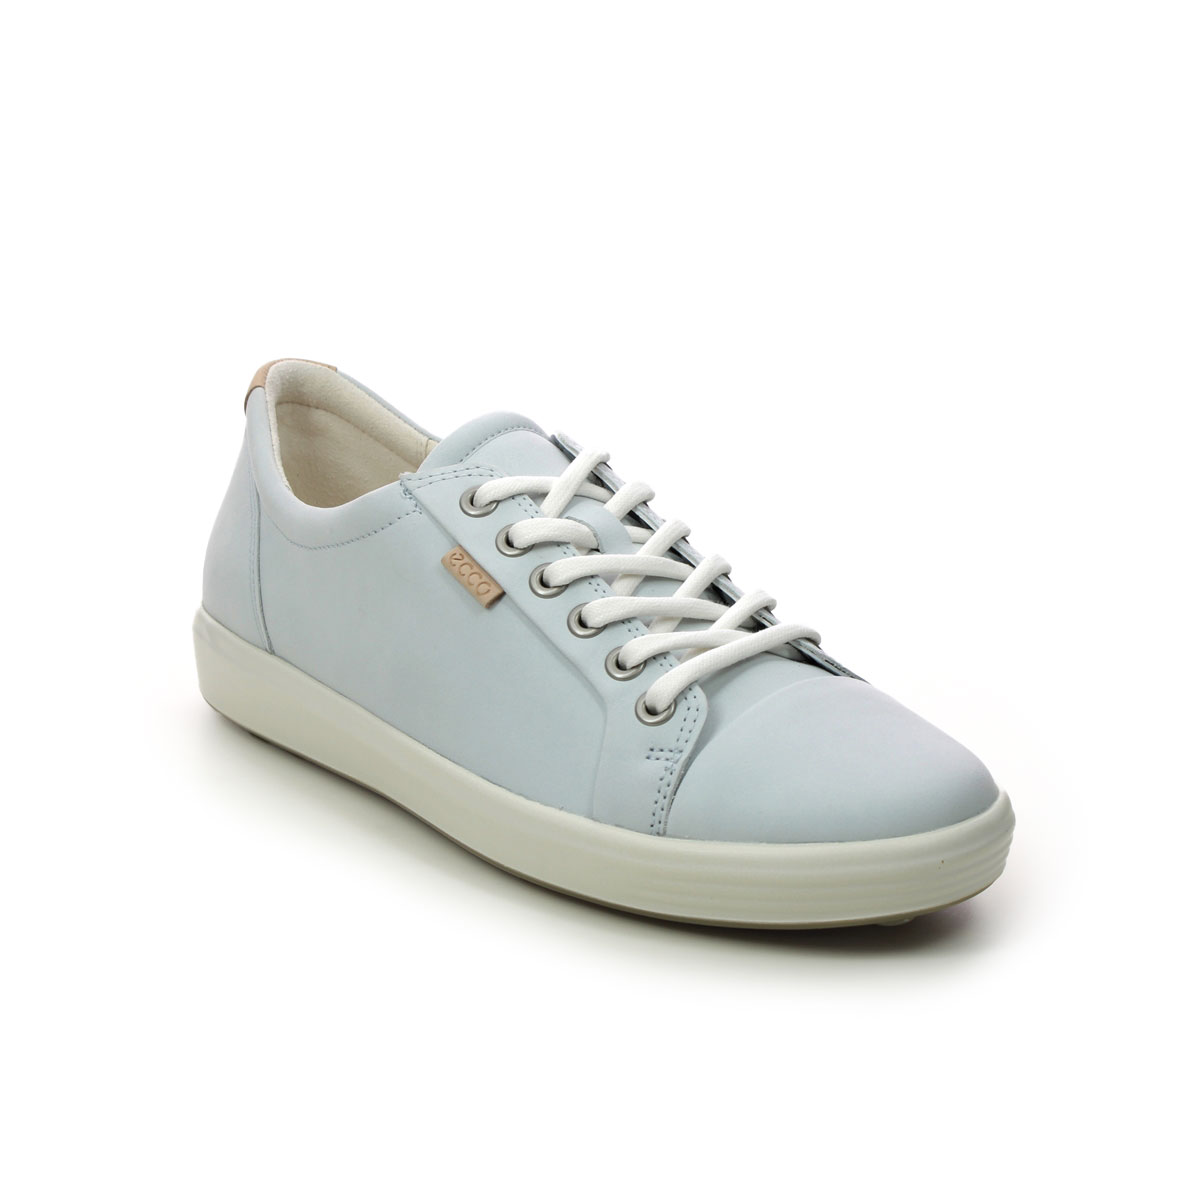 ECCO Soft 7 Lace Pale blue Womens trainers 430003-60728 in a Plain Leather in Size 38